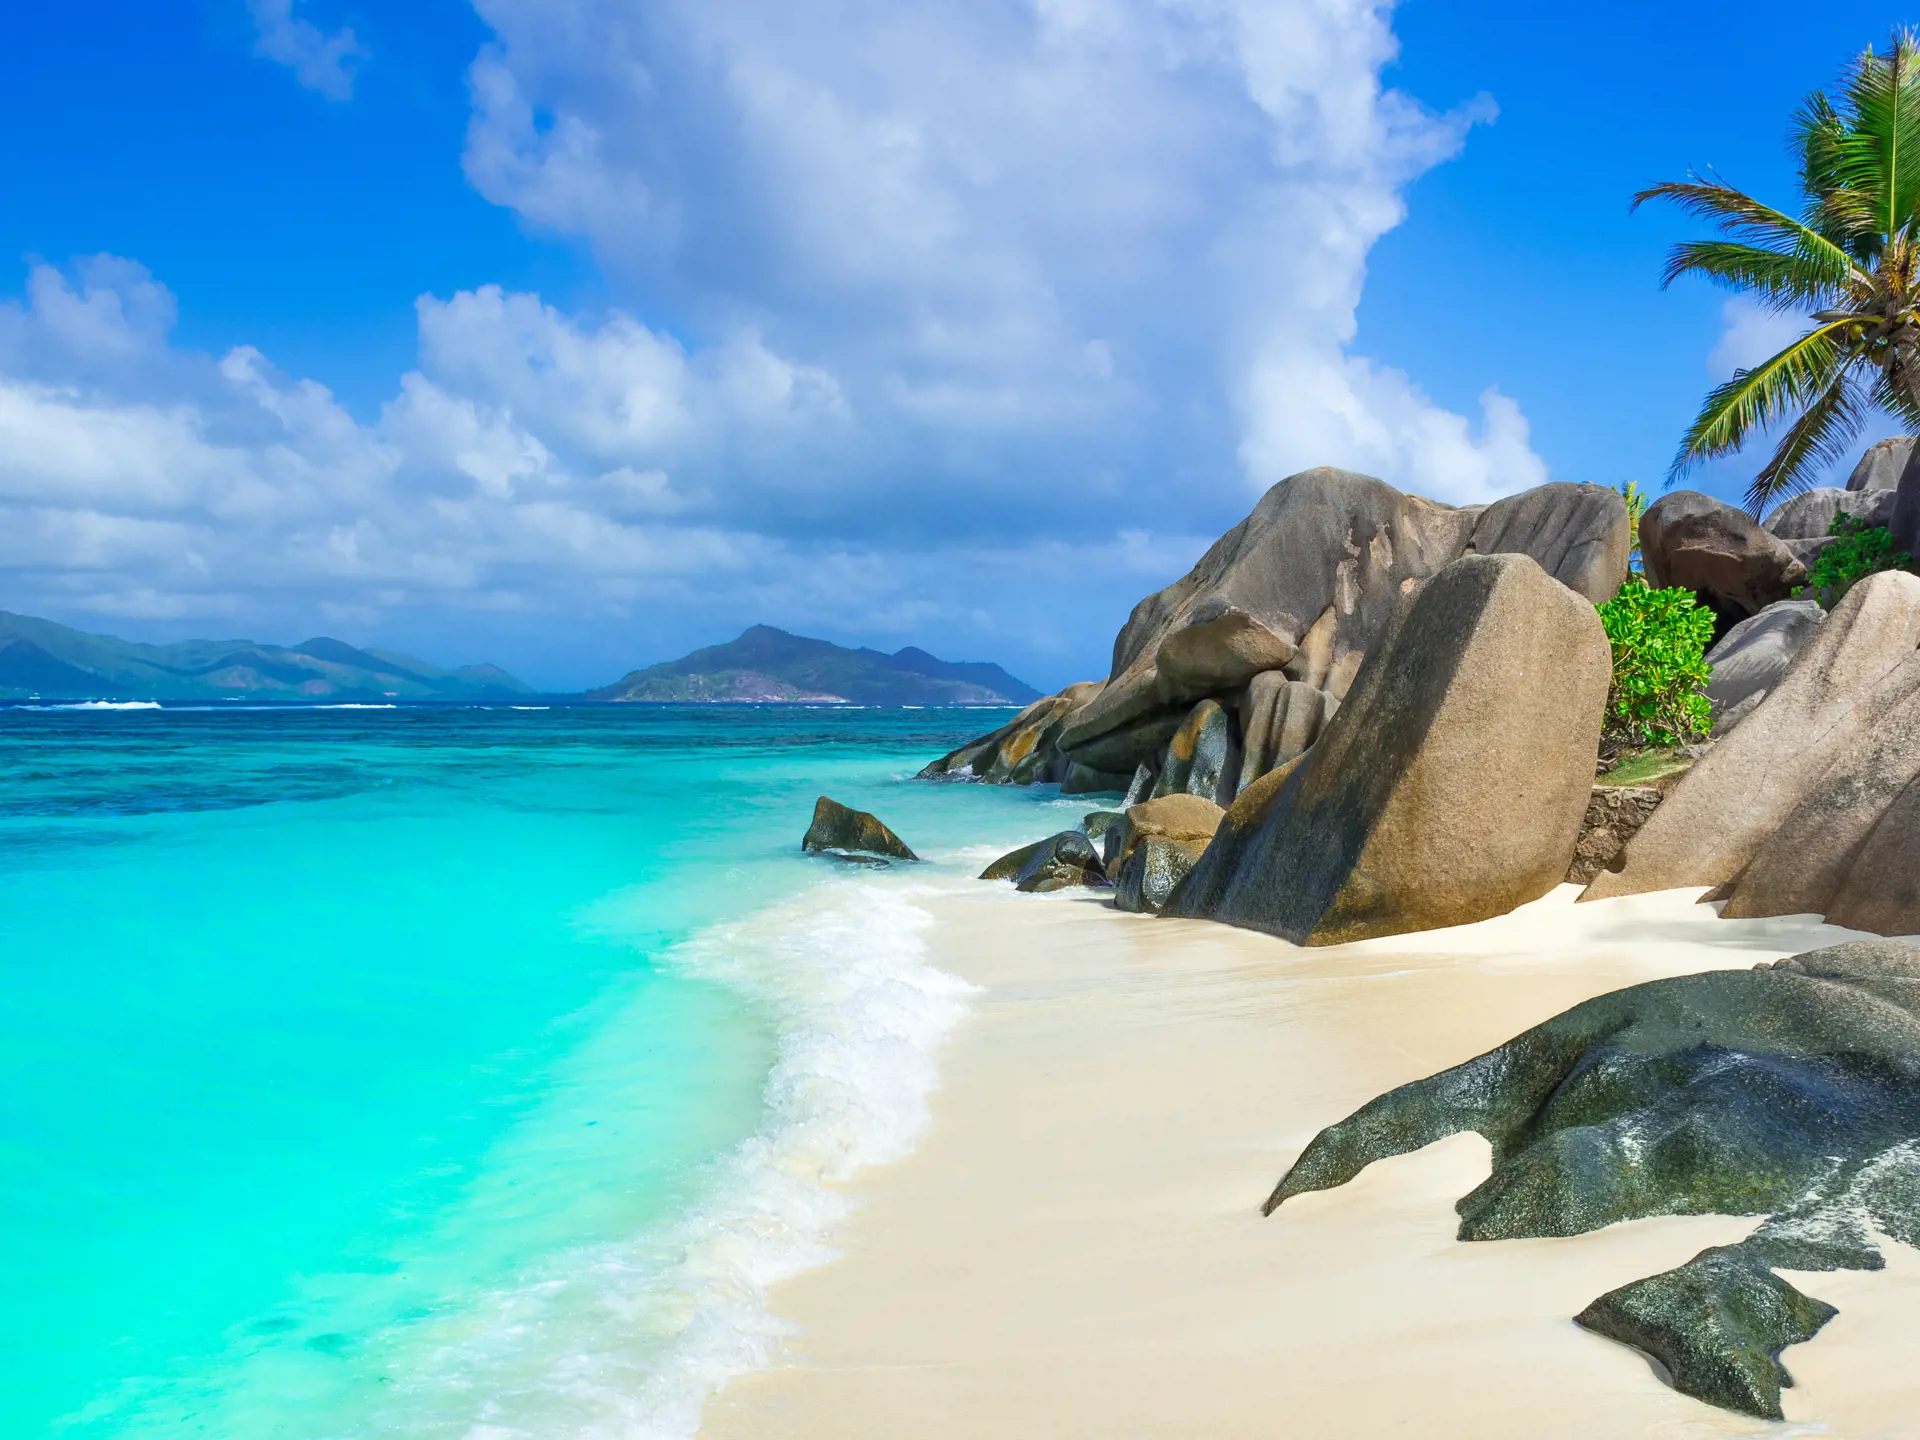 shutterstock_298379204 Most beautiful beach of the world on island La Digue in Seychelles - Anse Source d'Argent.jpg